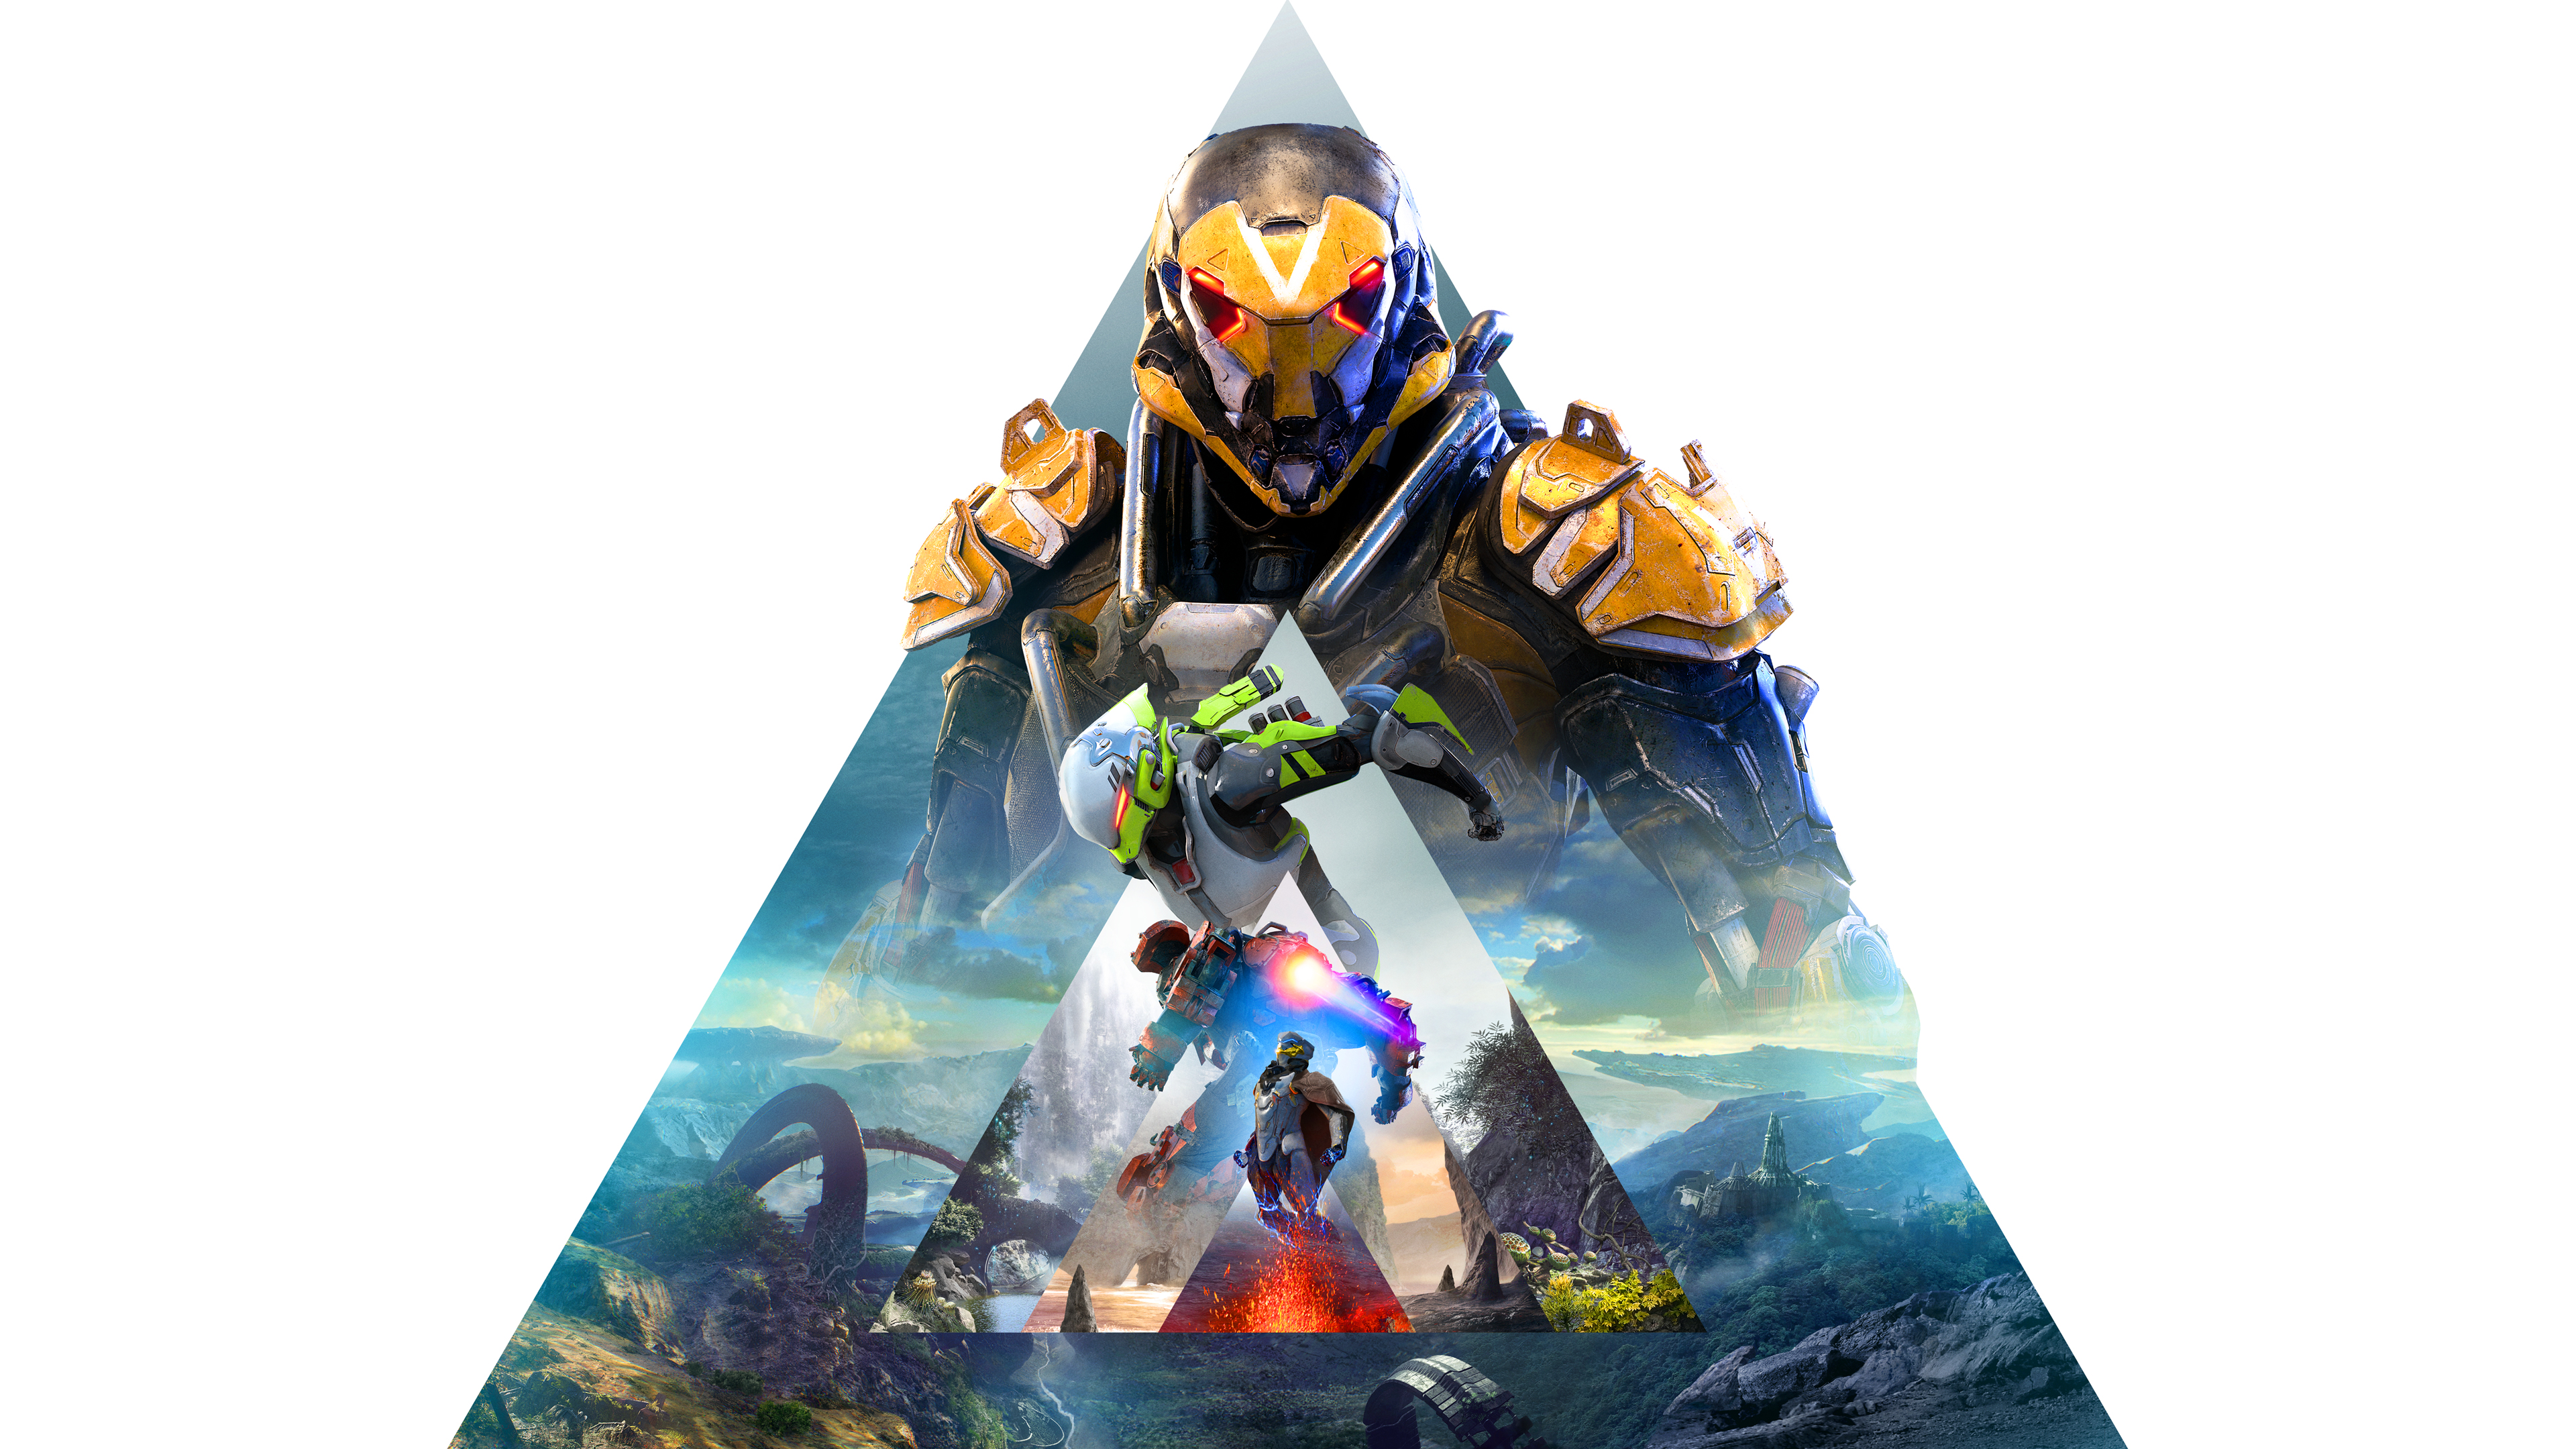 General 3840x2160 Anthem video game art video games simple background white background minimalism armor pyramid looking at viewer